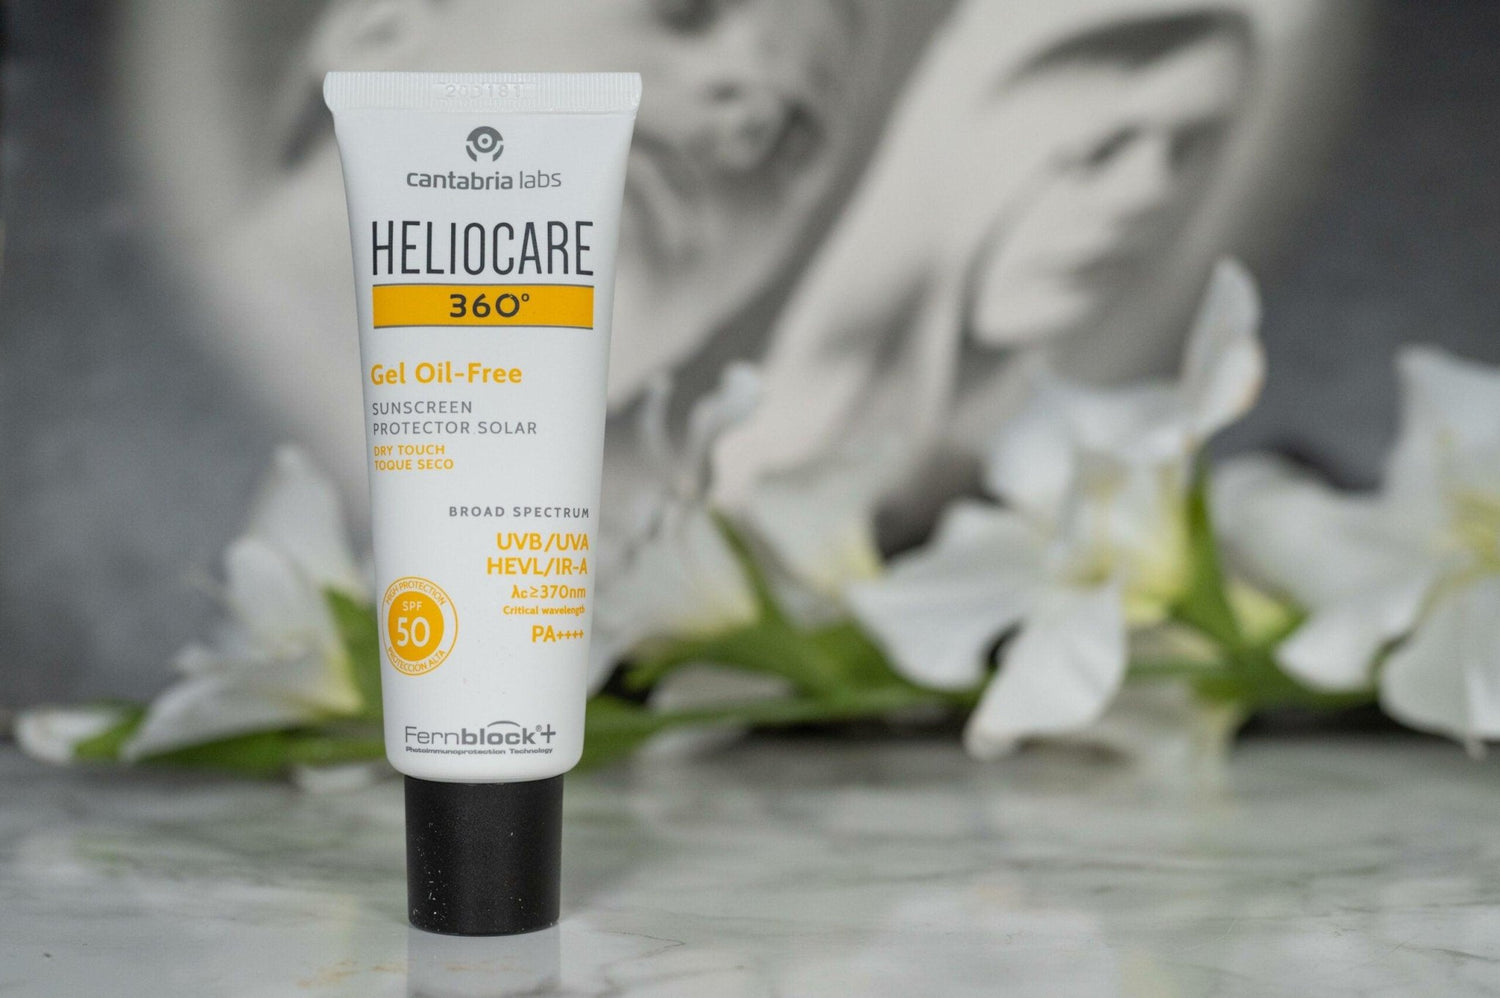 Heliocare 360°: Beyond the Summertime - ngskinclinic